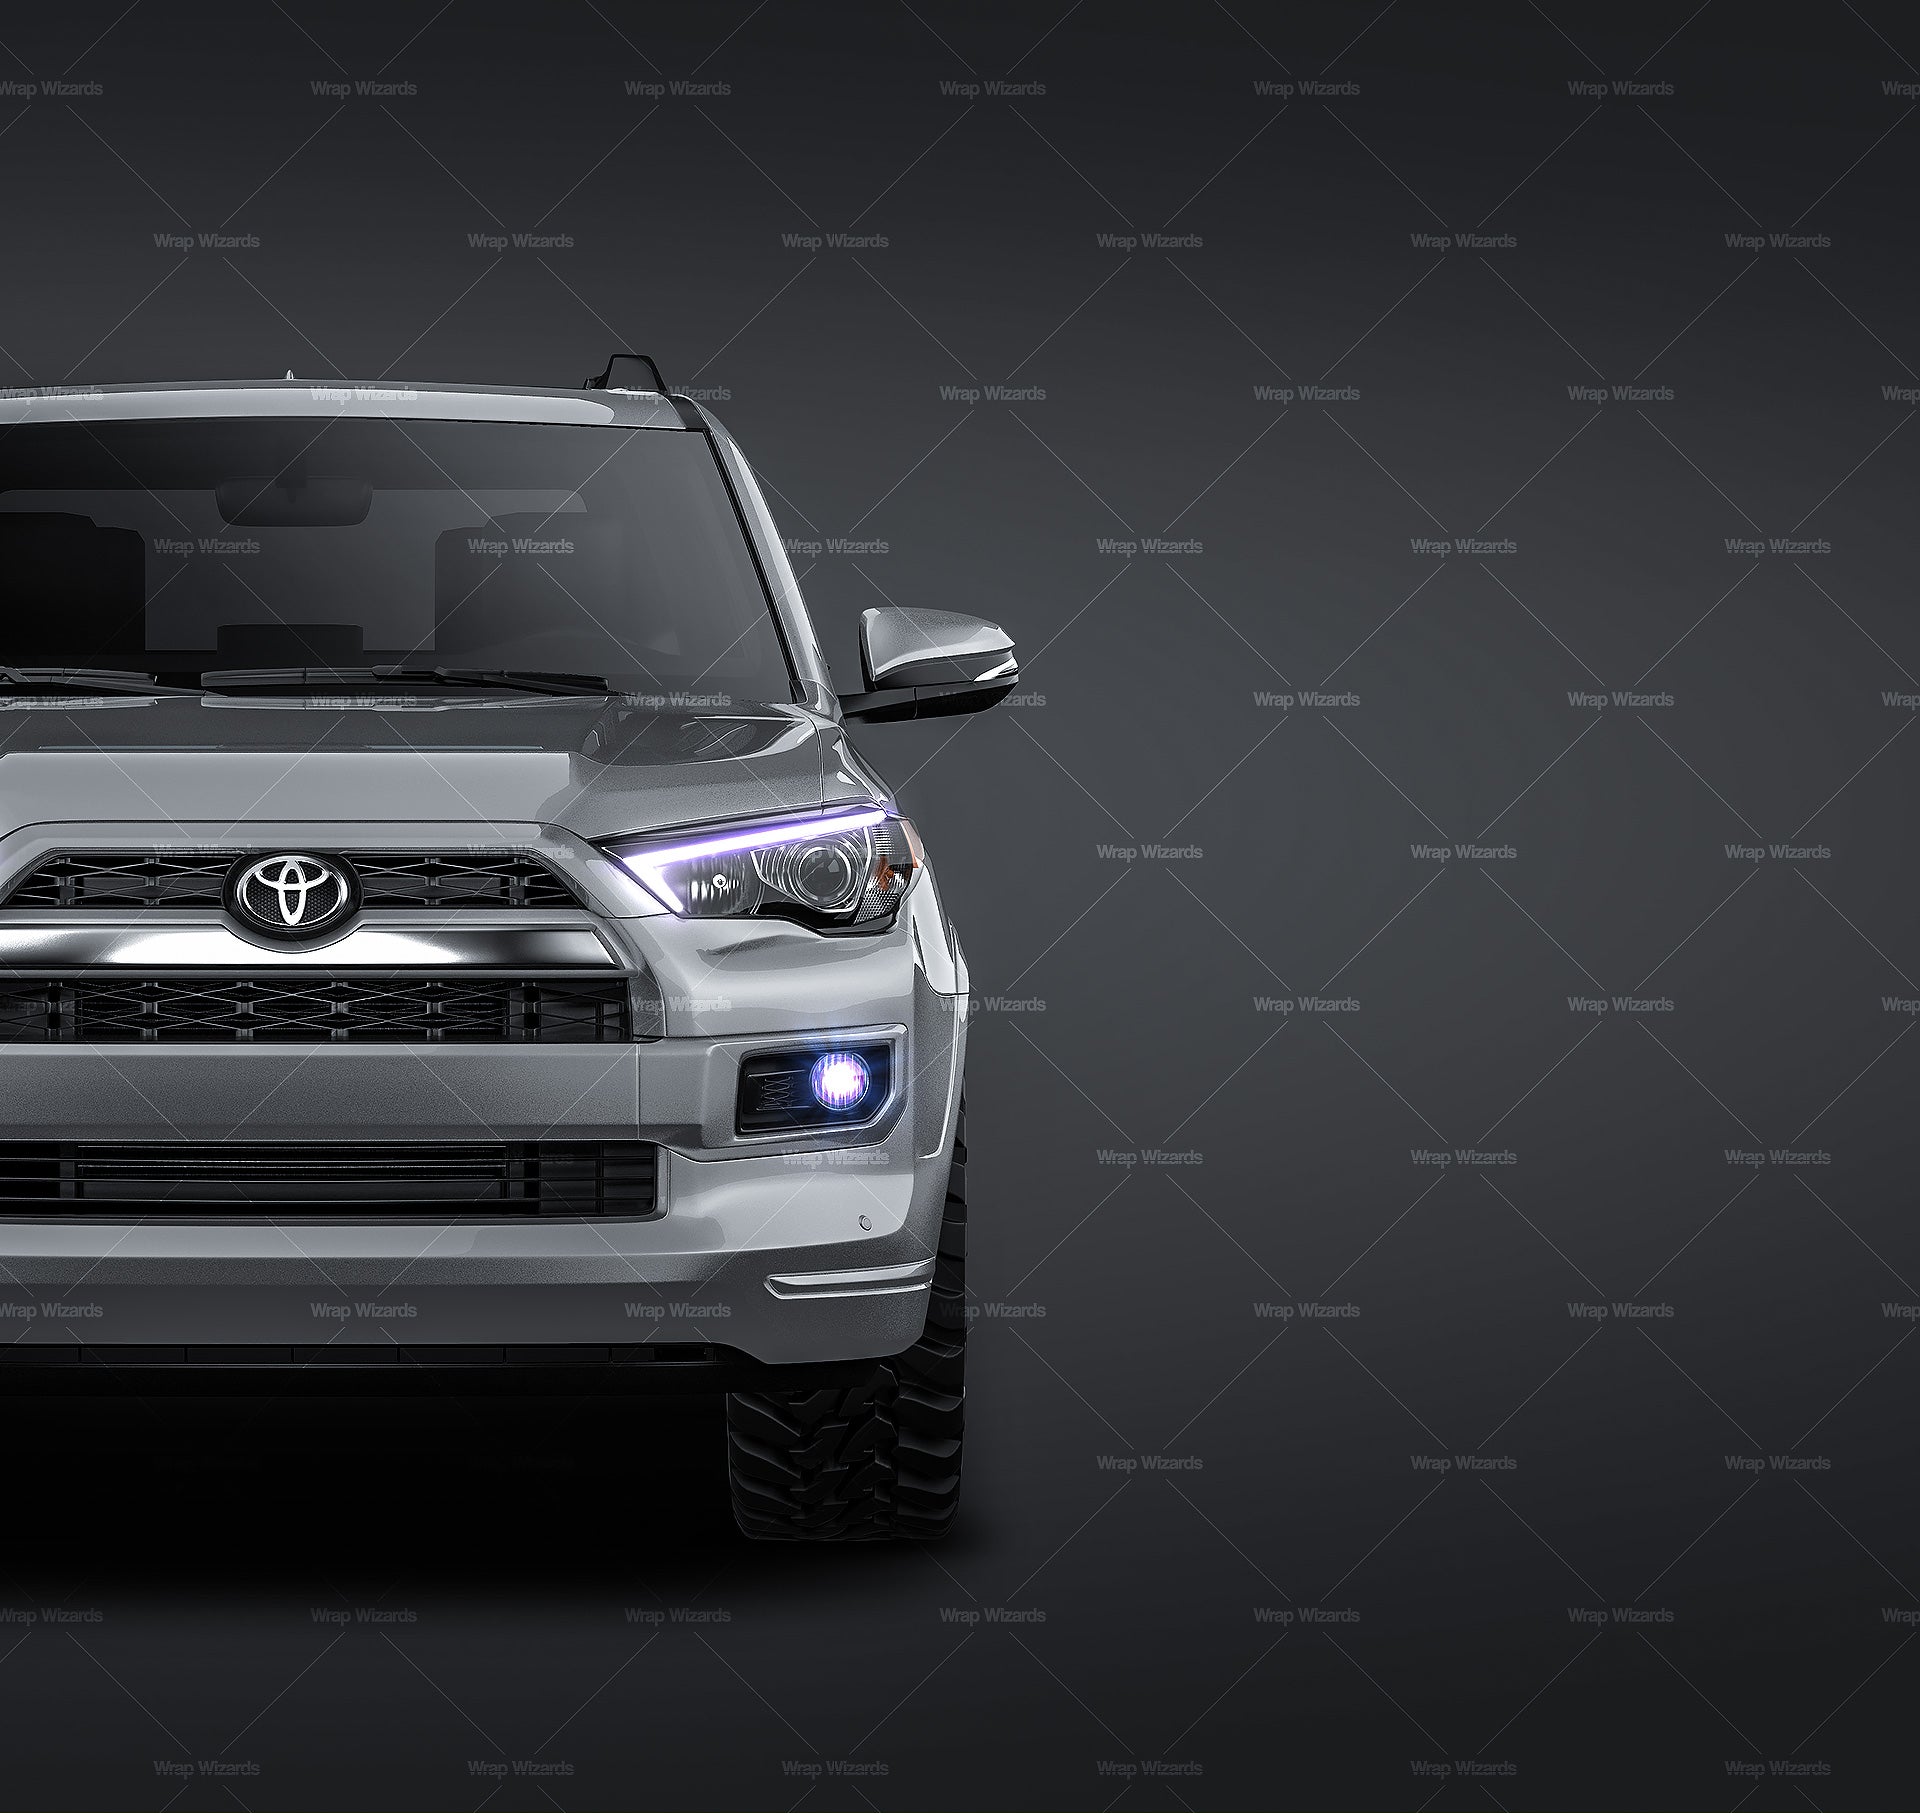 Toyota 4Runner 2013 glossy finish - all sides Car Mockup Template.psd